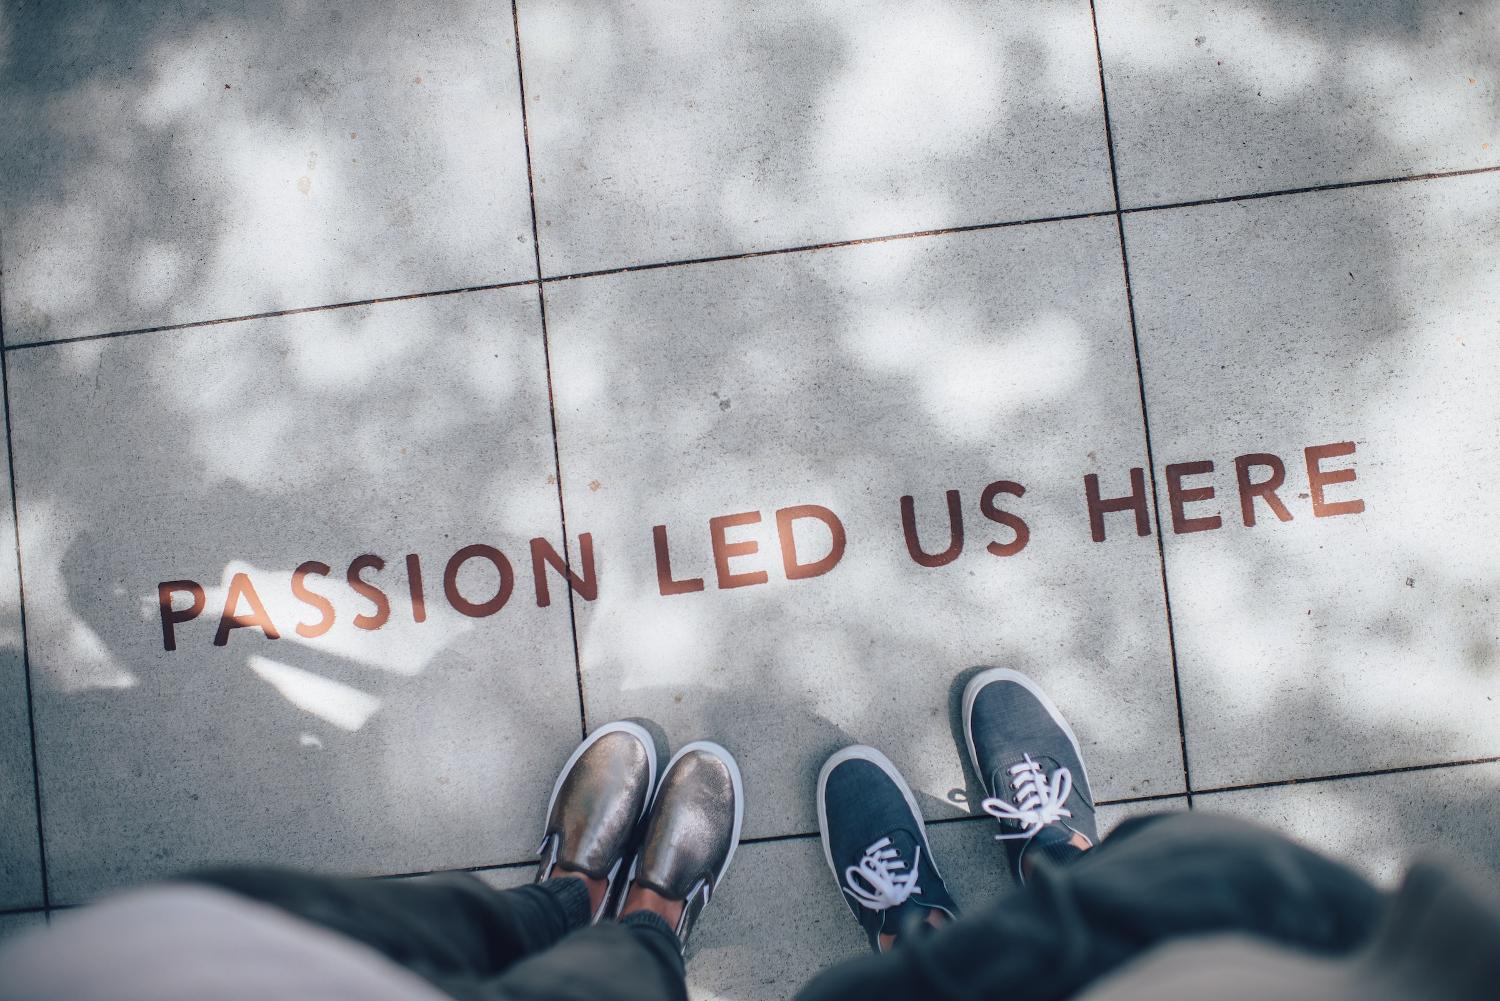 A photo looking down at two pairs of shoes and the words "Passion Led Us Here".